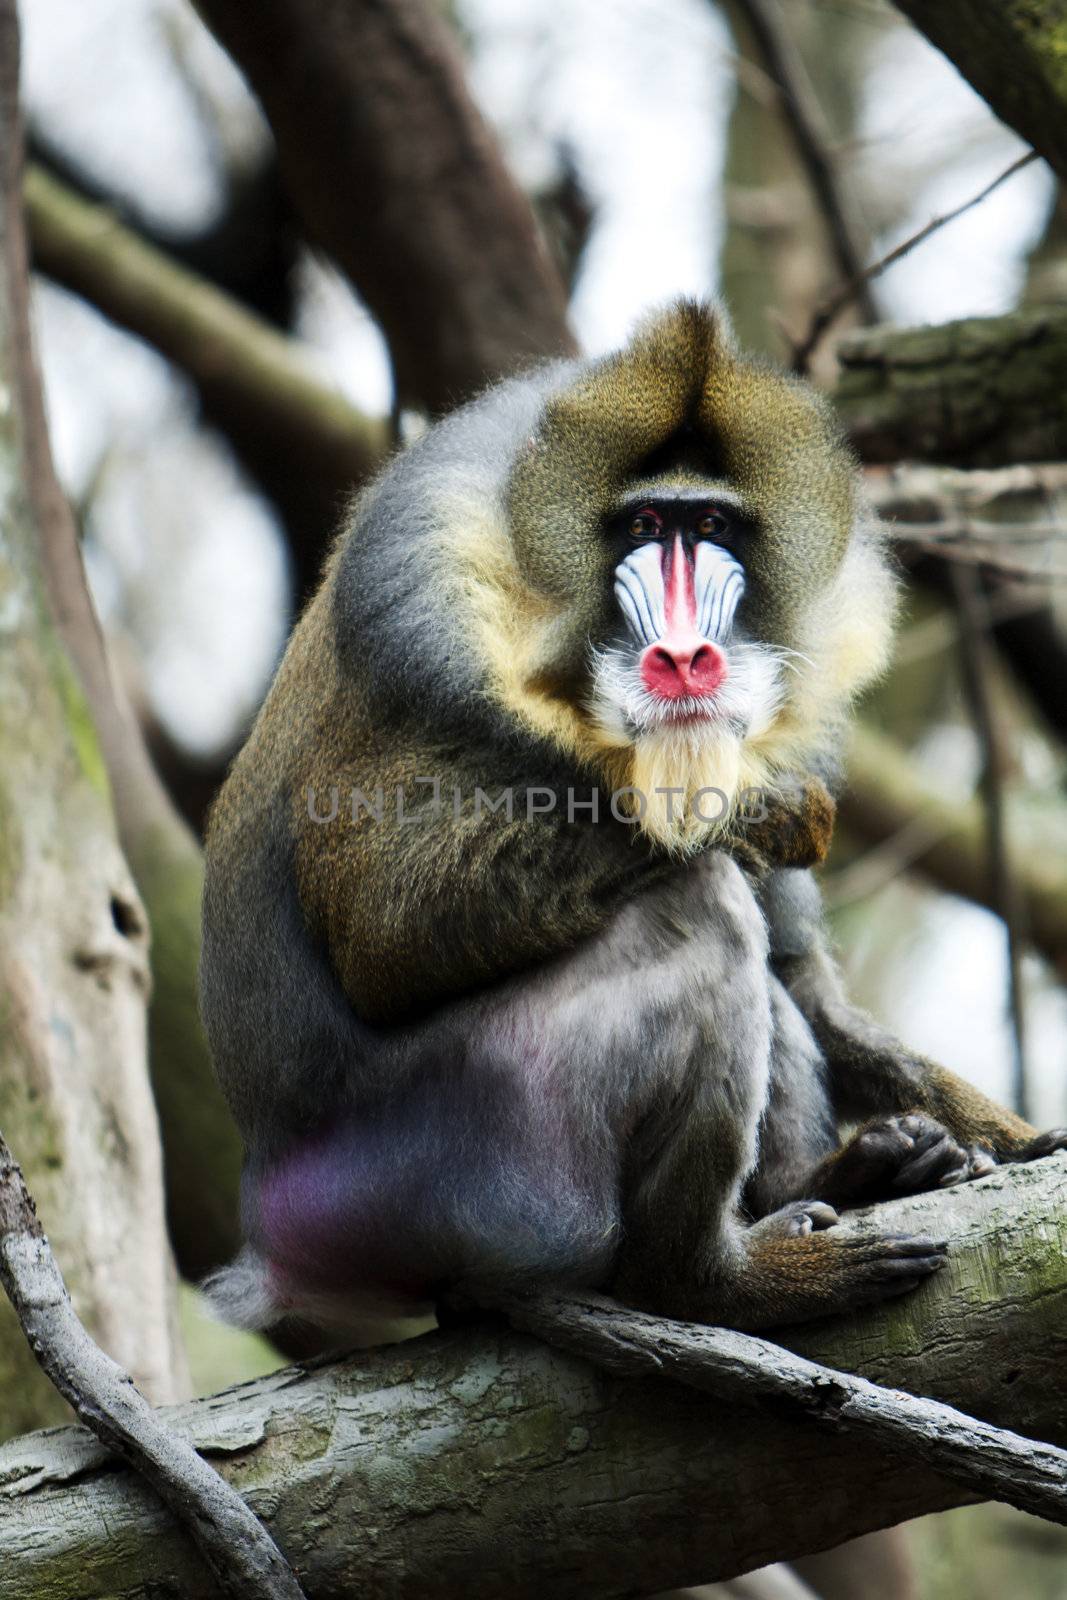 Mandrill with colorful face sitting on tree branch in jungle zoo.